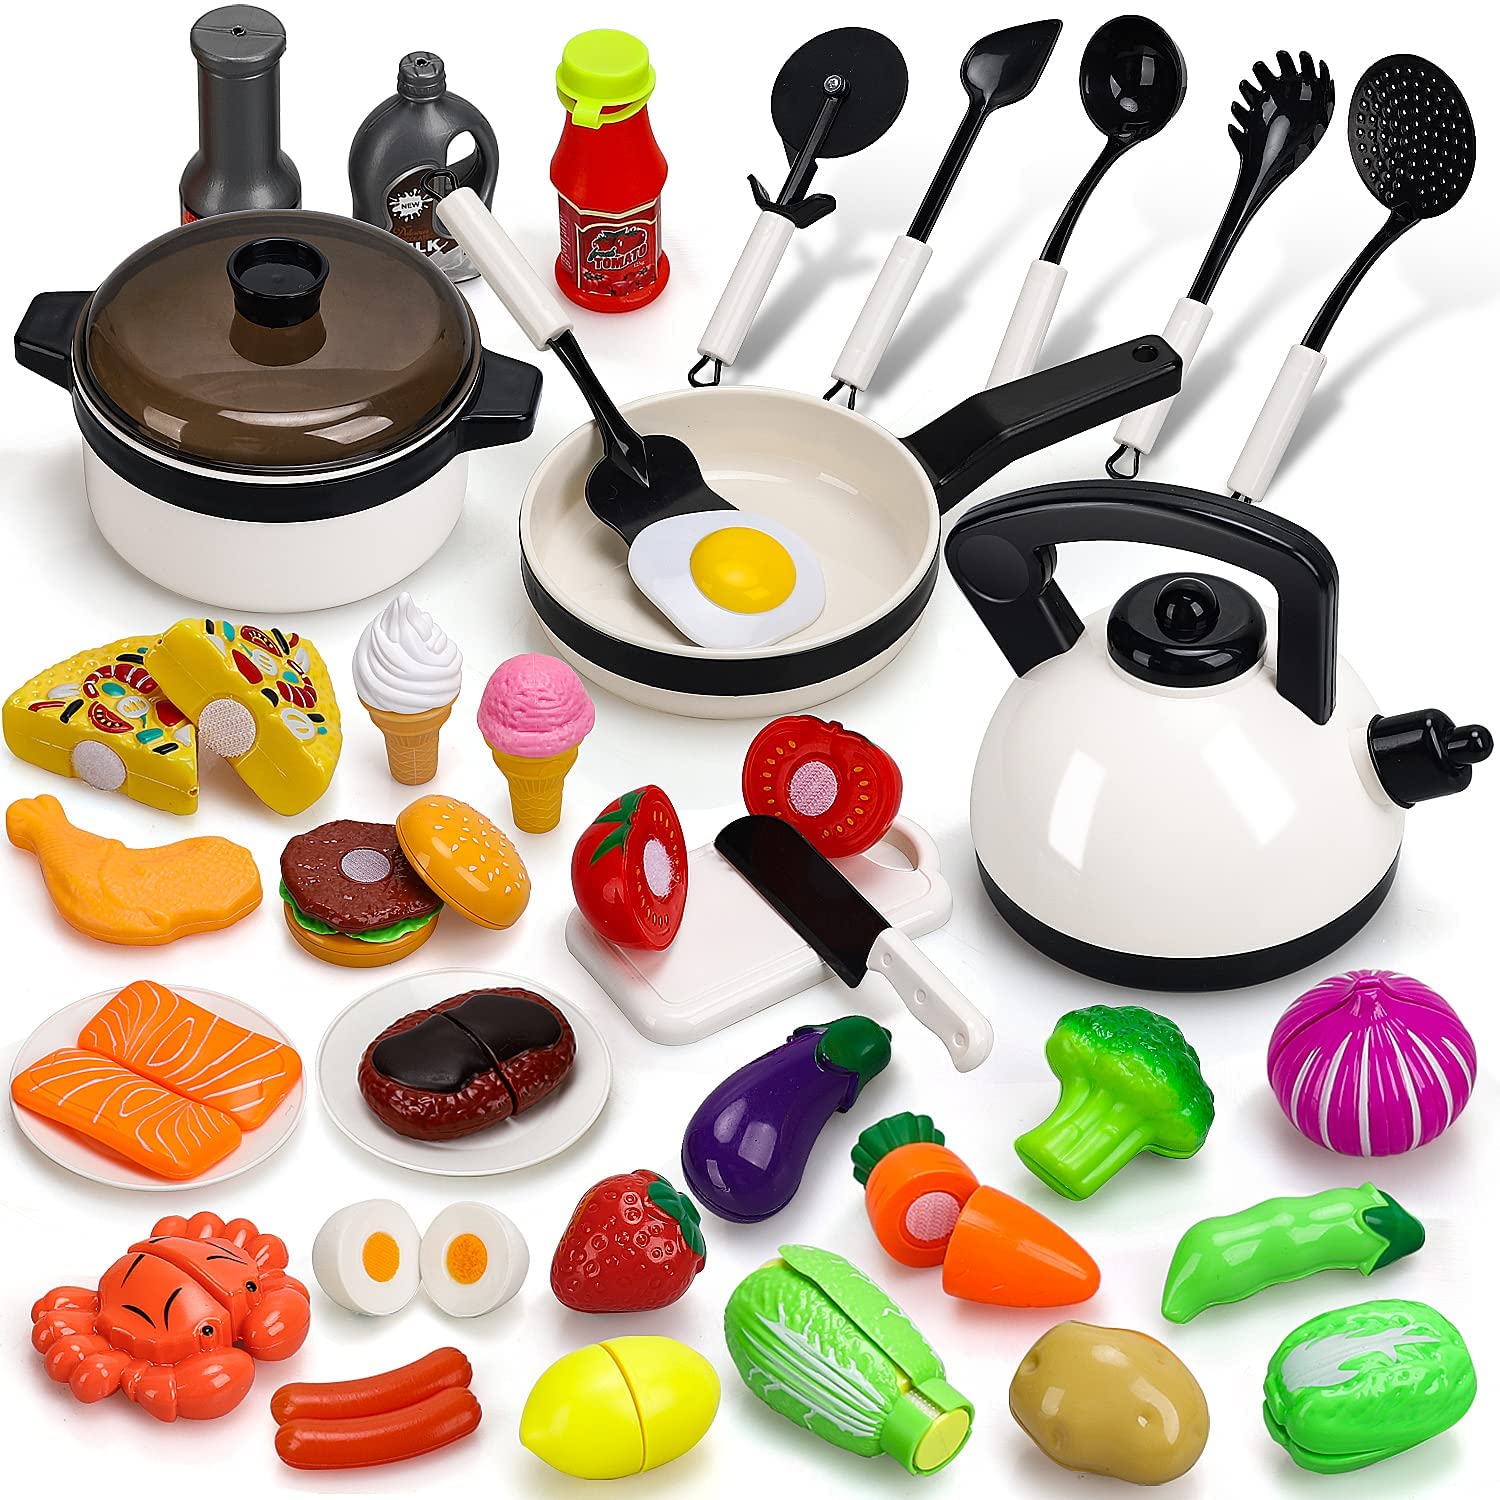 Number 1 in Gadgets 11 Piece Pizza Set for Kids; Play Food Toy Set; Great  for a Pretend Pizza Party; Fast Food Cooking and Cutting Play Set Toy.